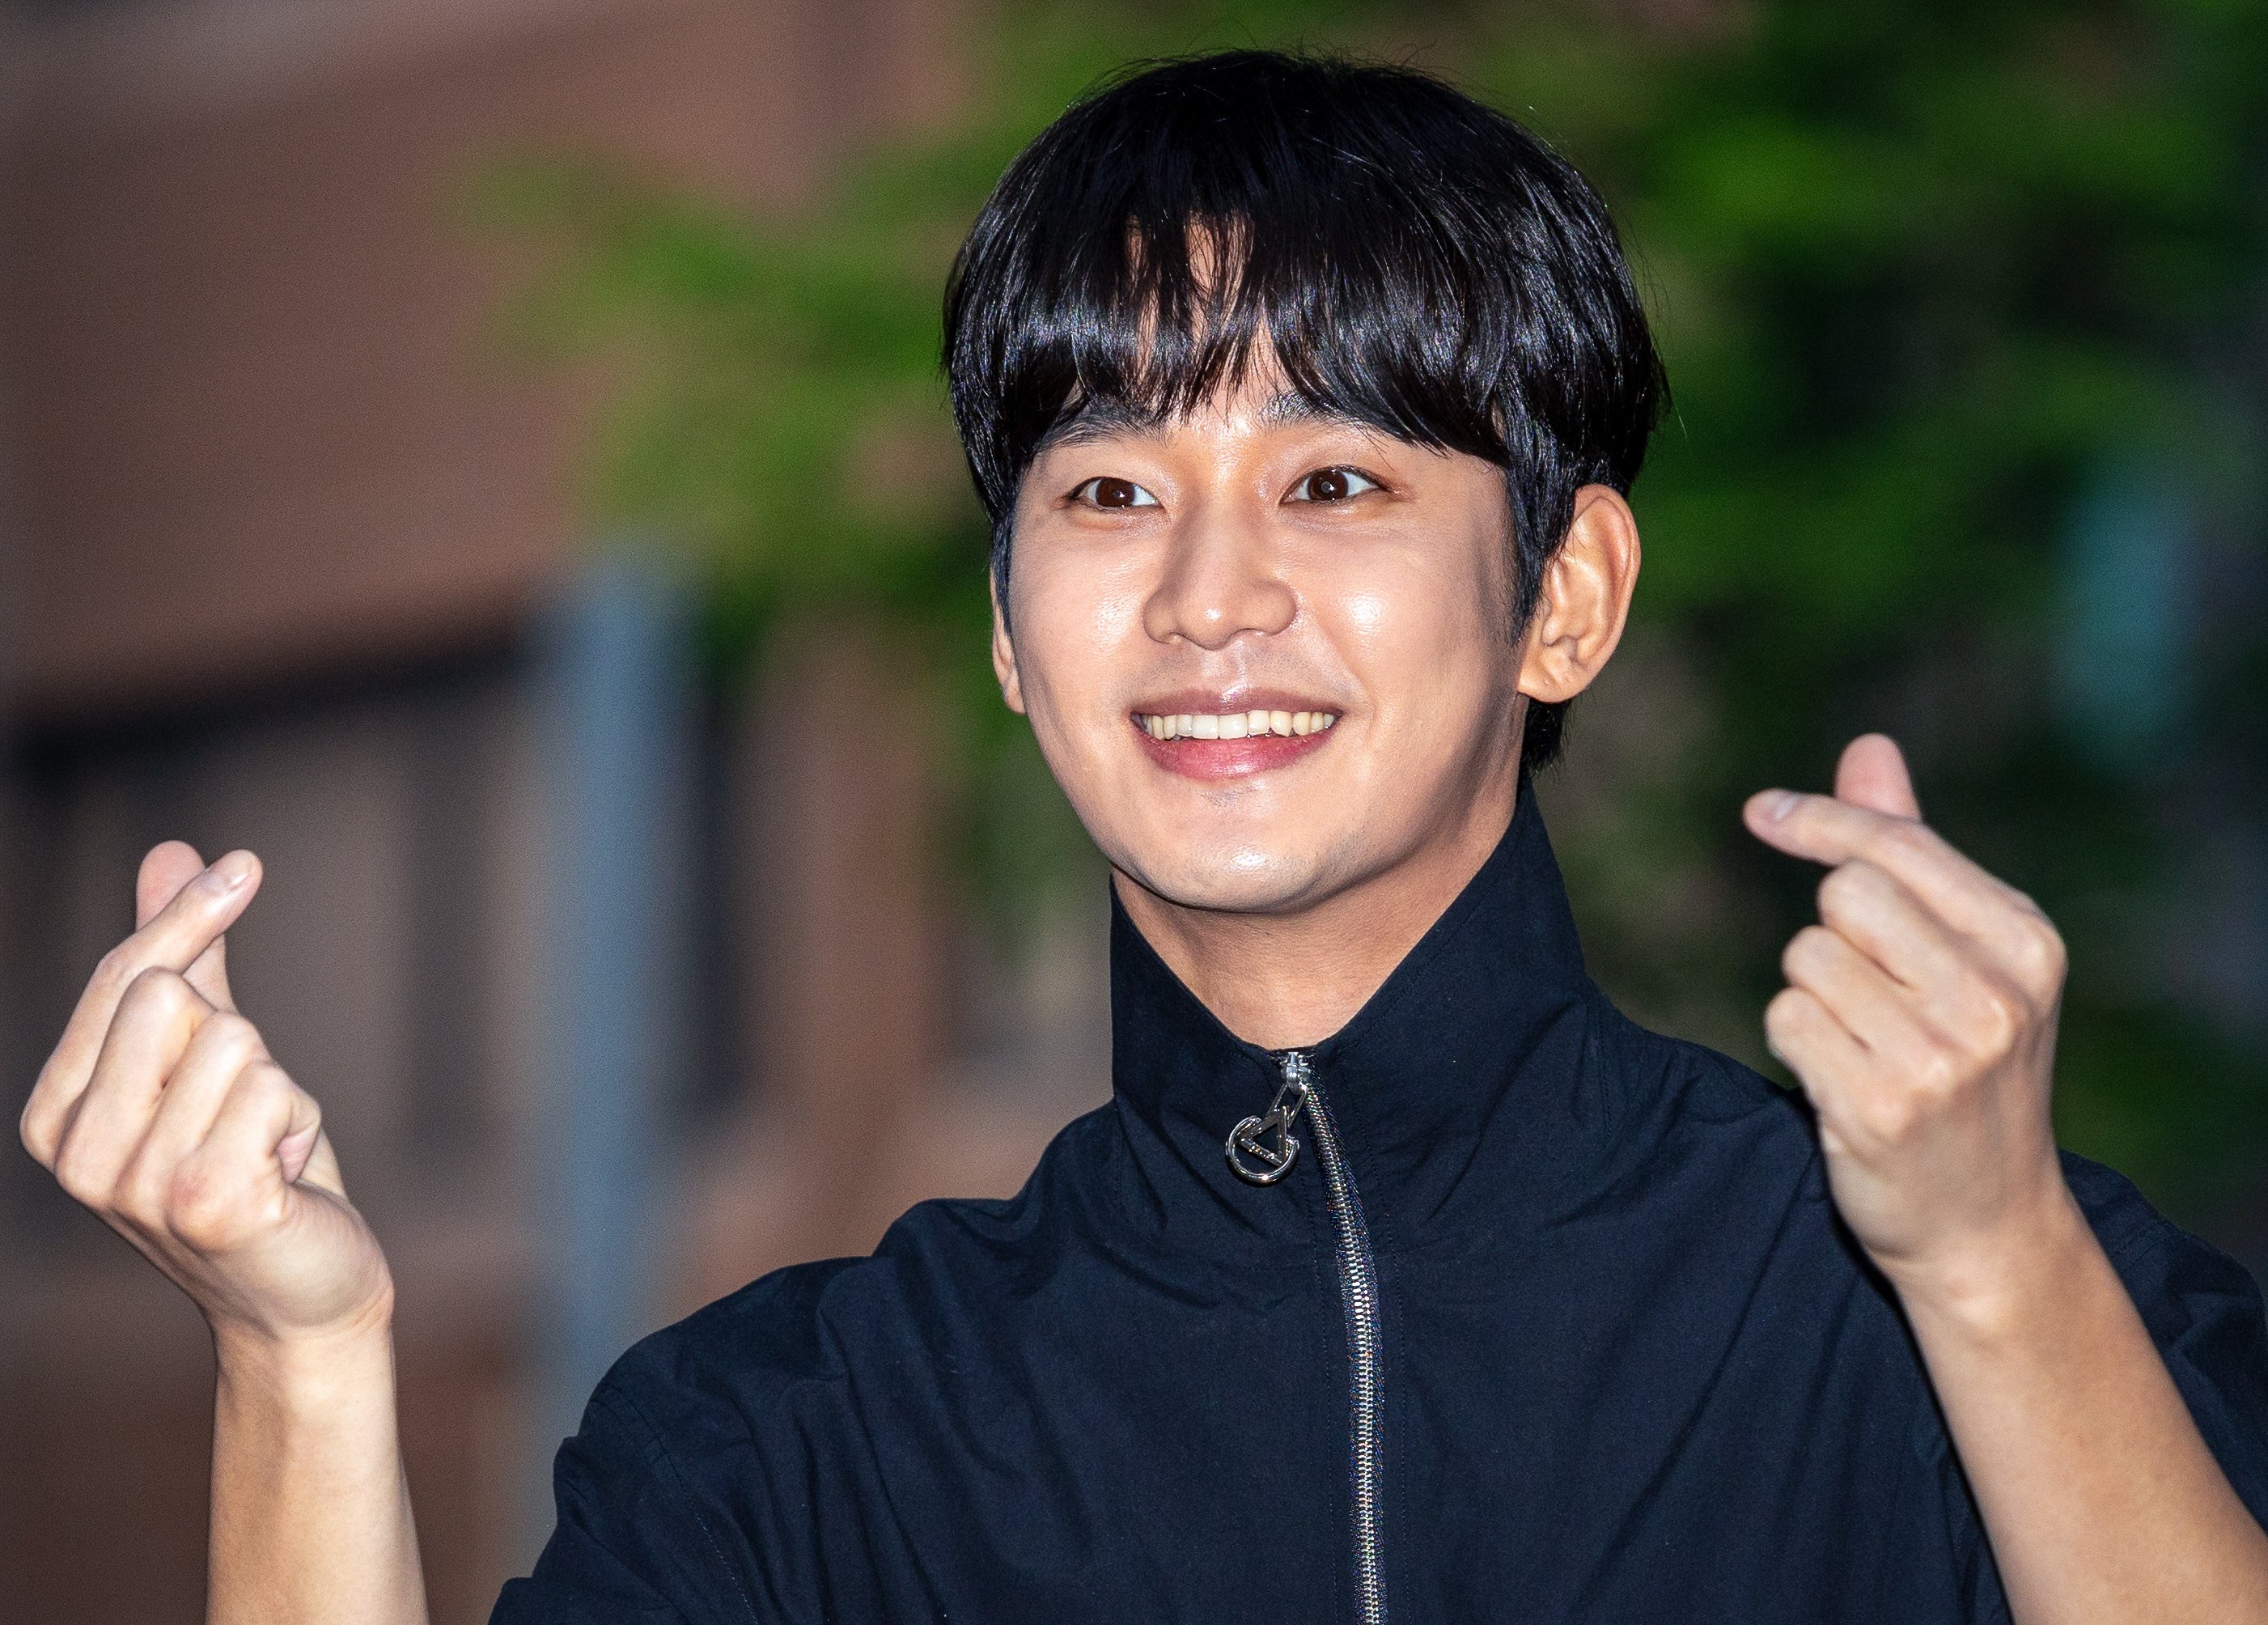 Kim Soo-hyun attends the closing party for Korean drama “Queen of Tears” in Seoul last month. Photo: ImaZins via Getty Images